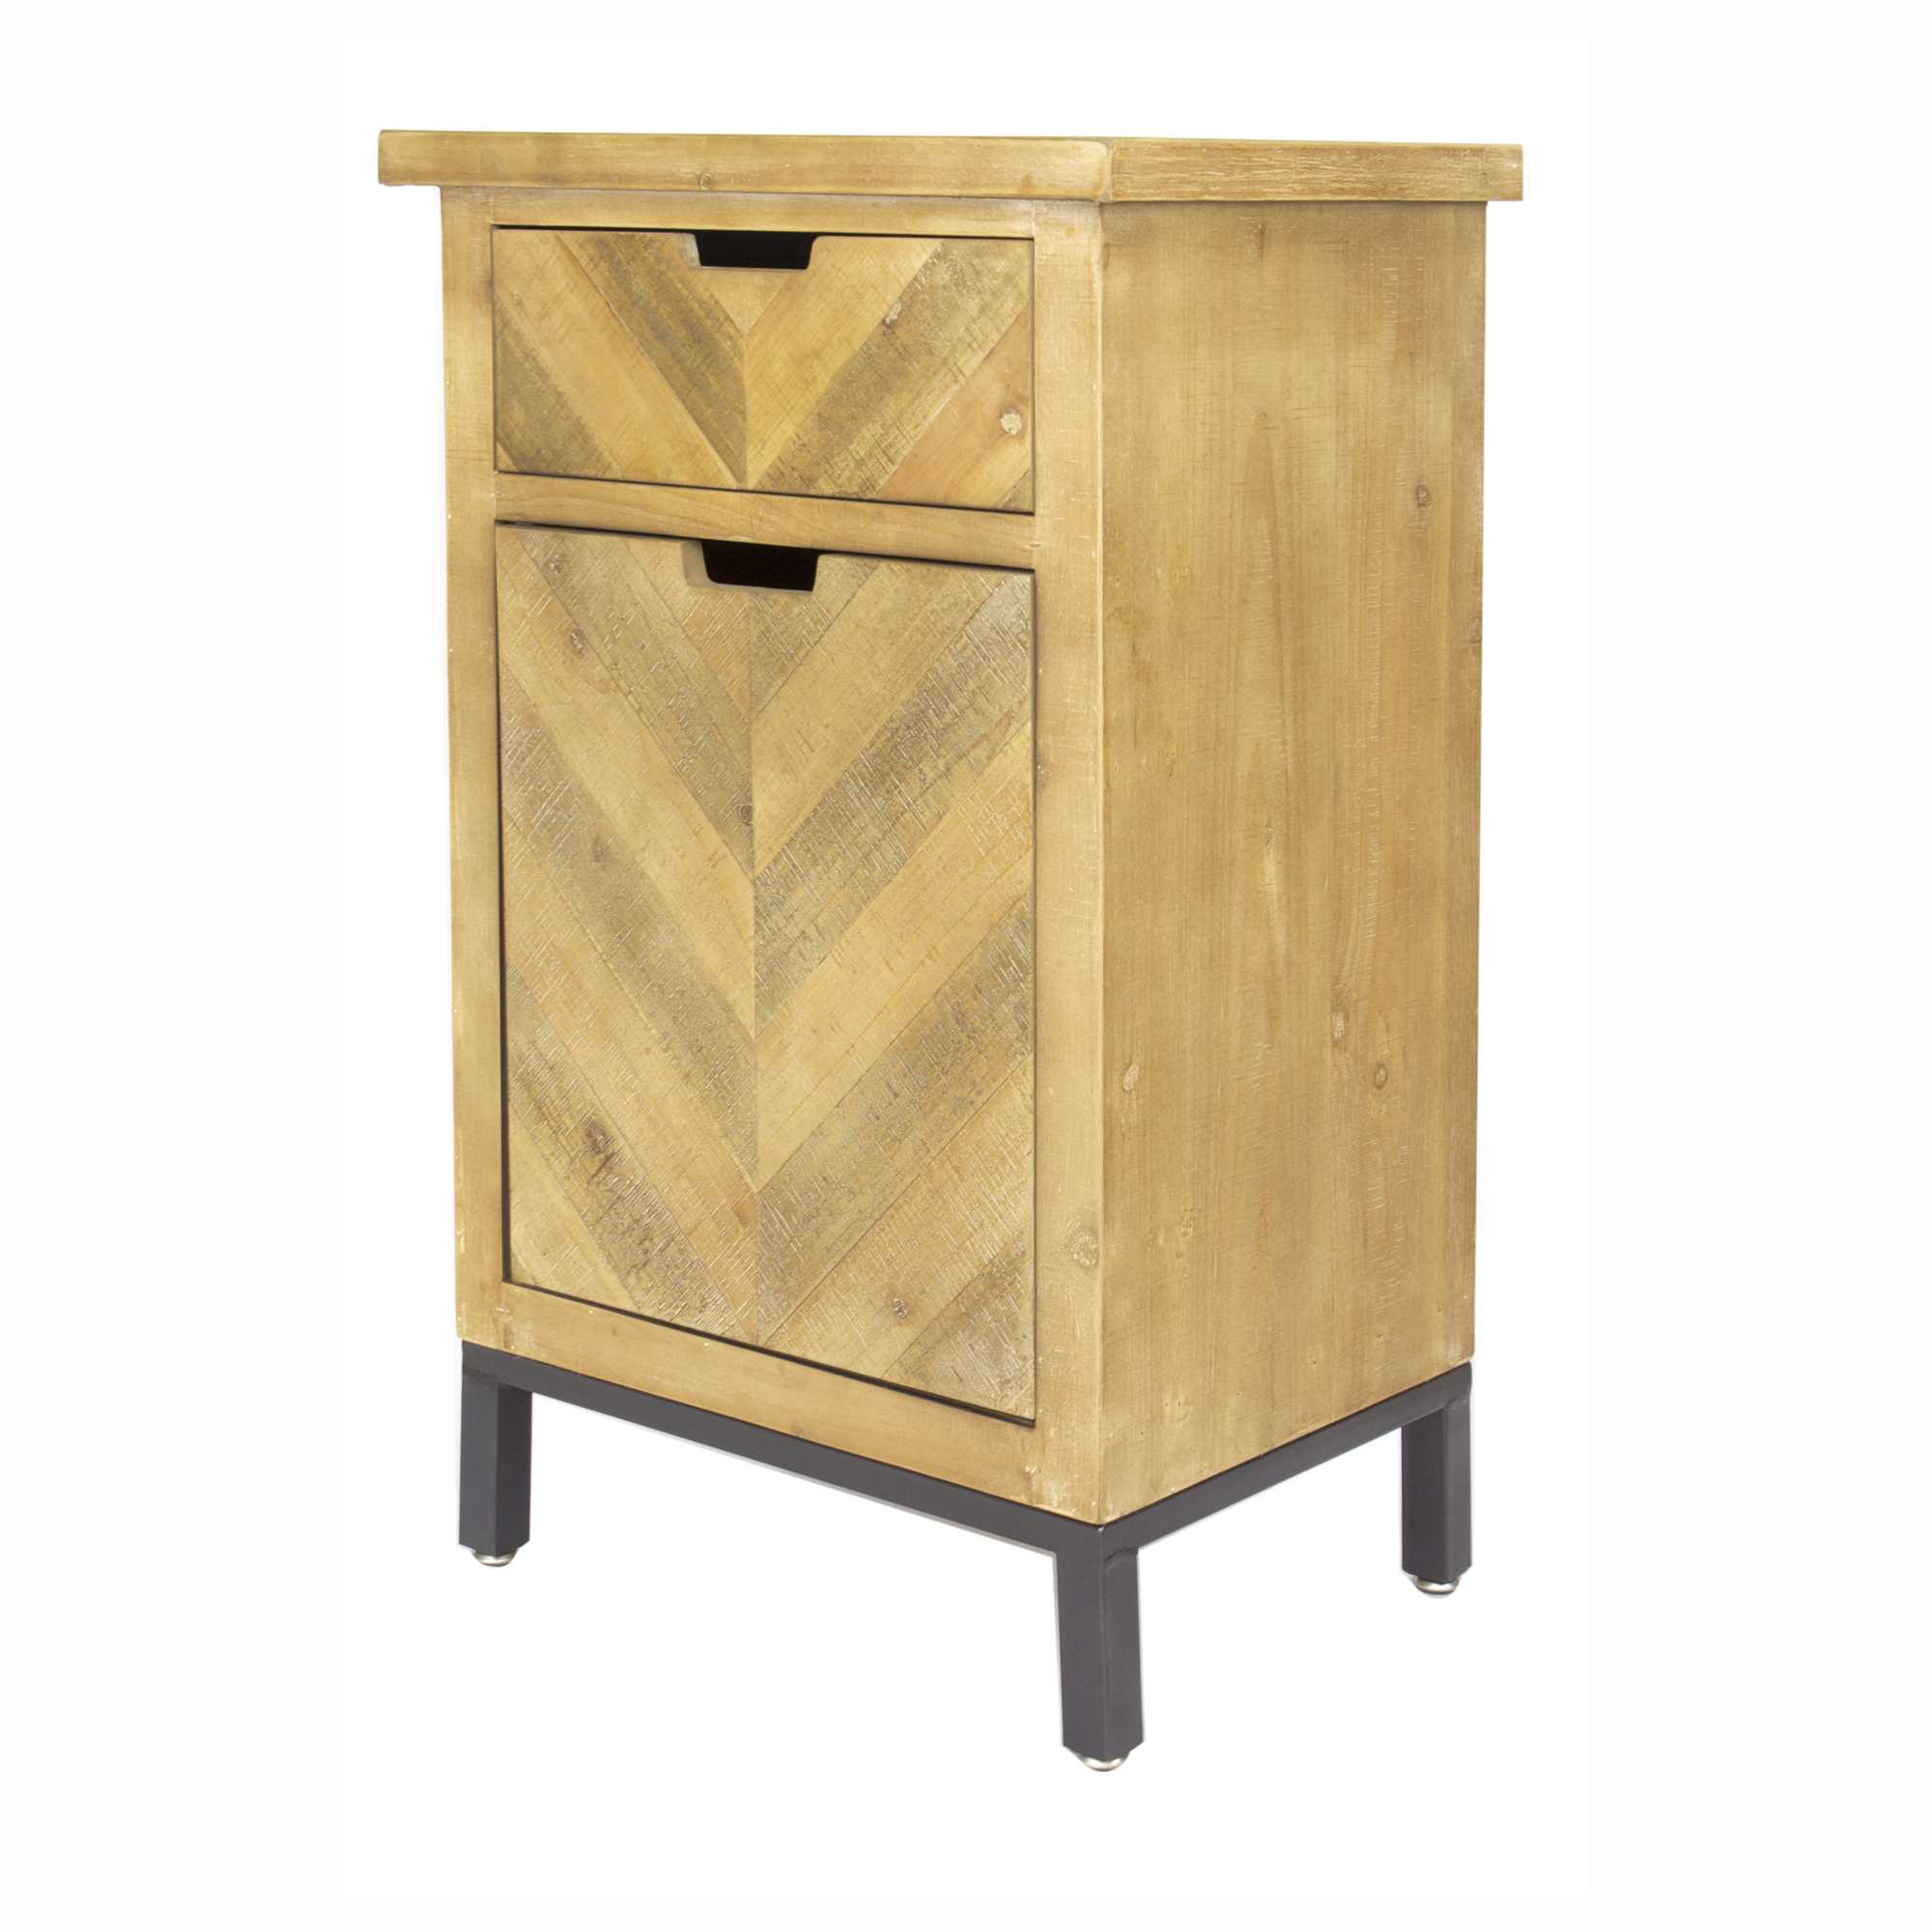 20" X 15" X 31.5" Natural Wood in Iron MDF Cabinet with a Drawer and a Door